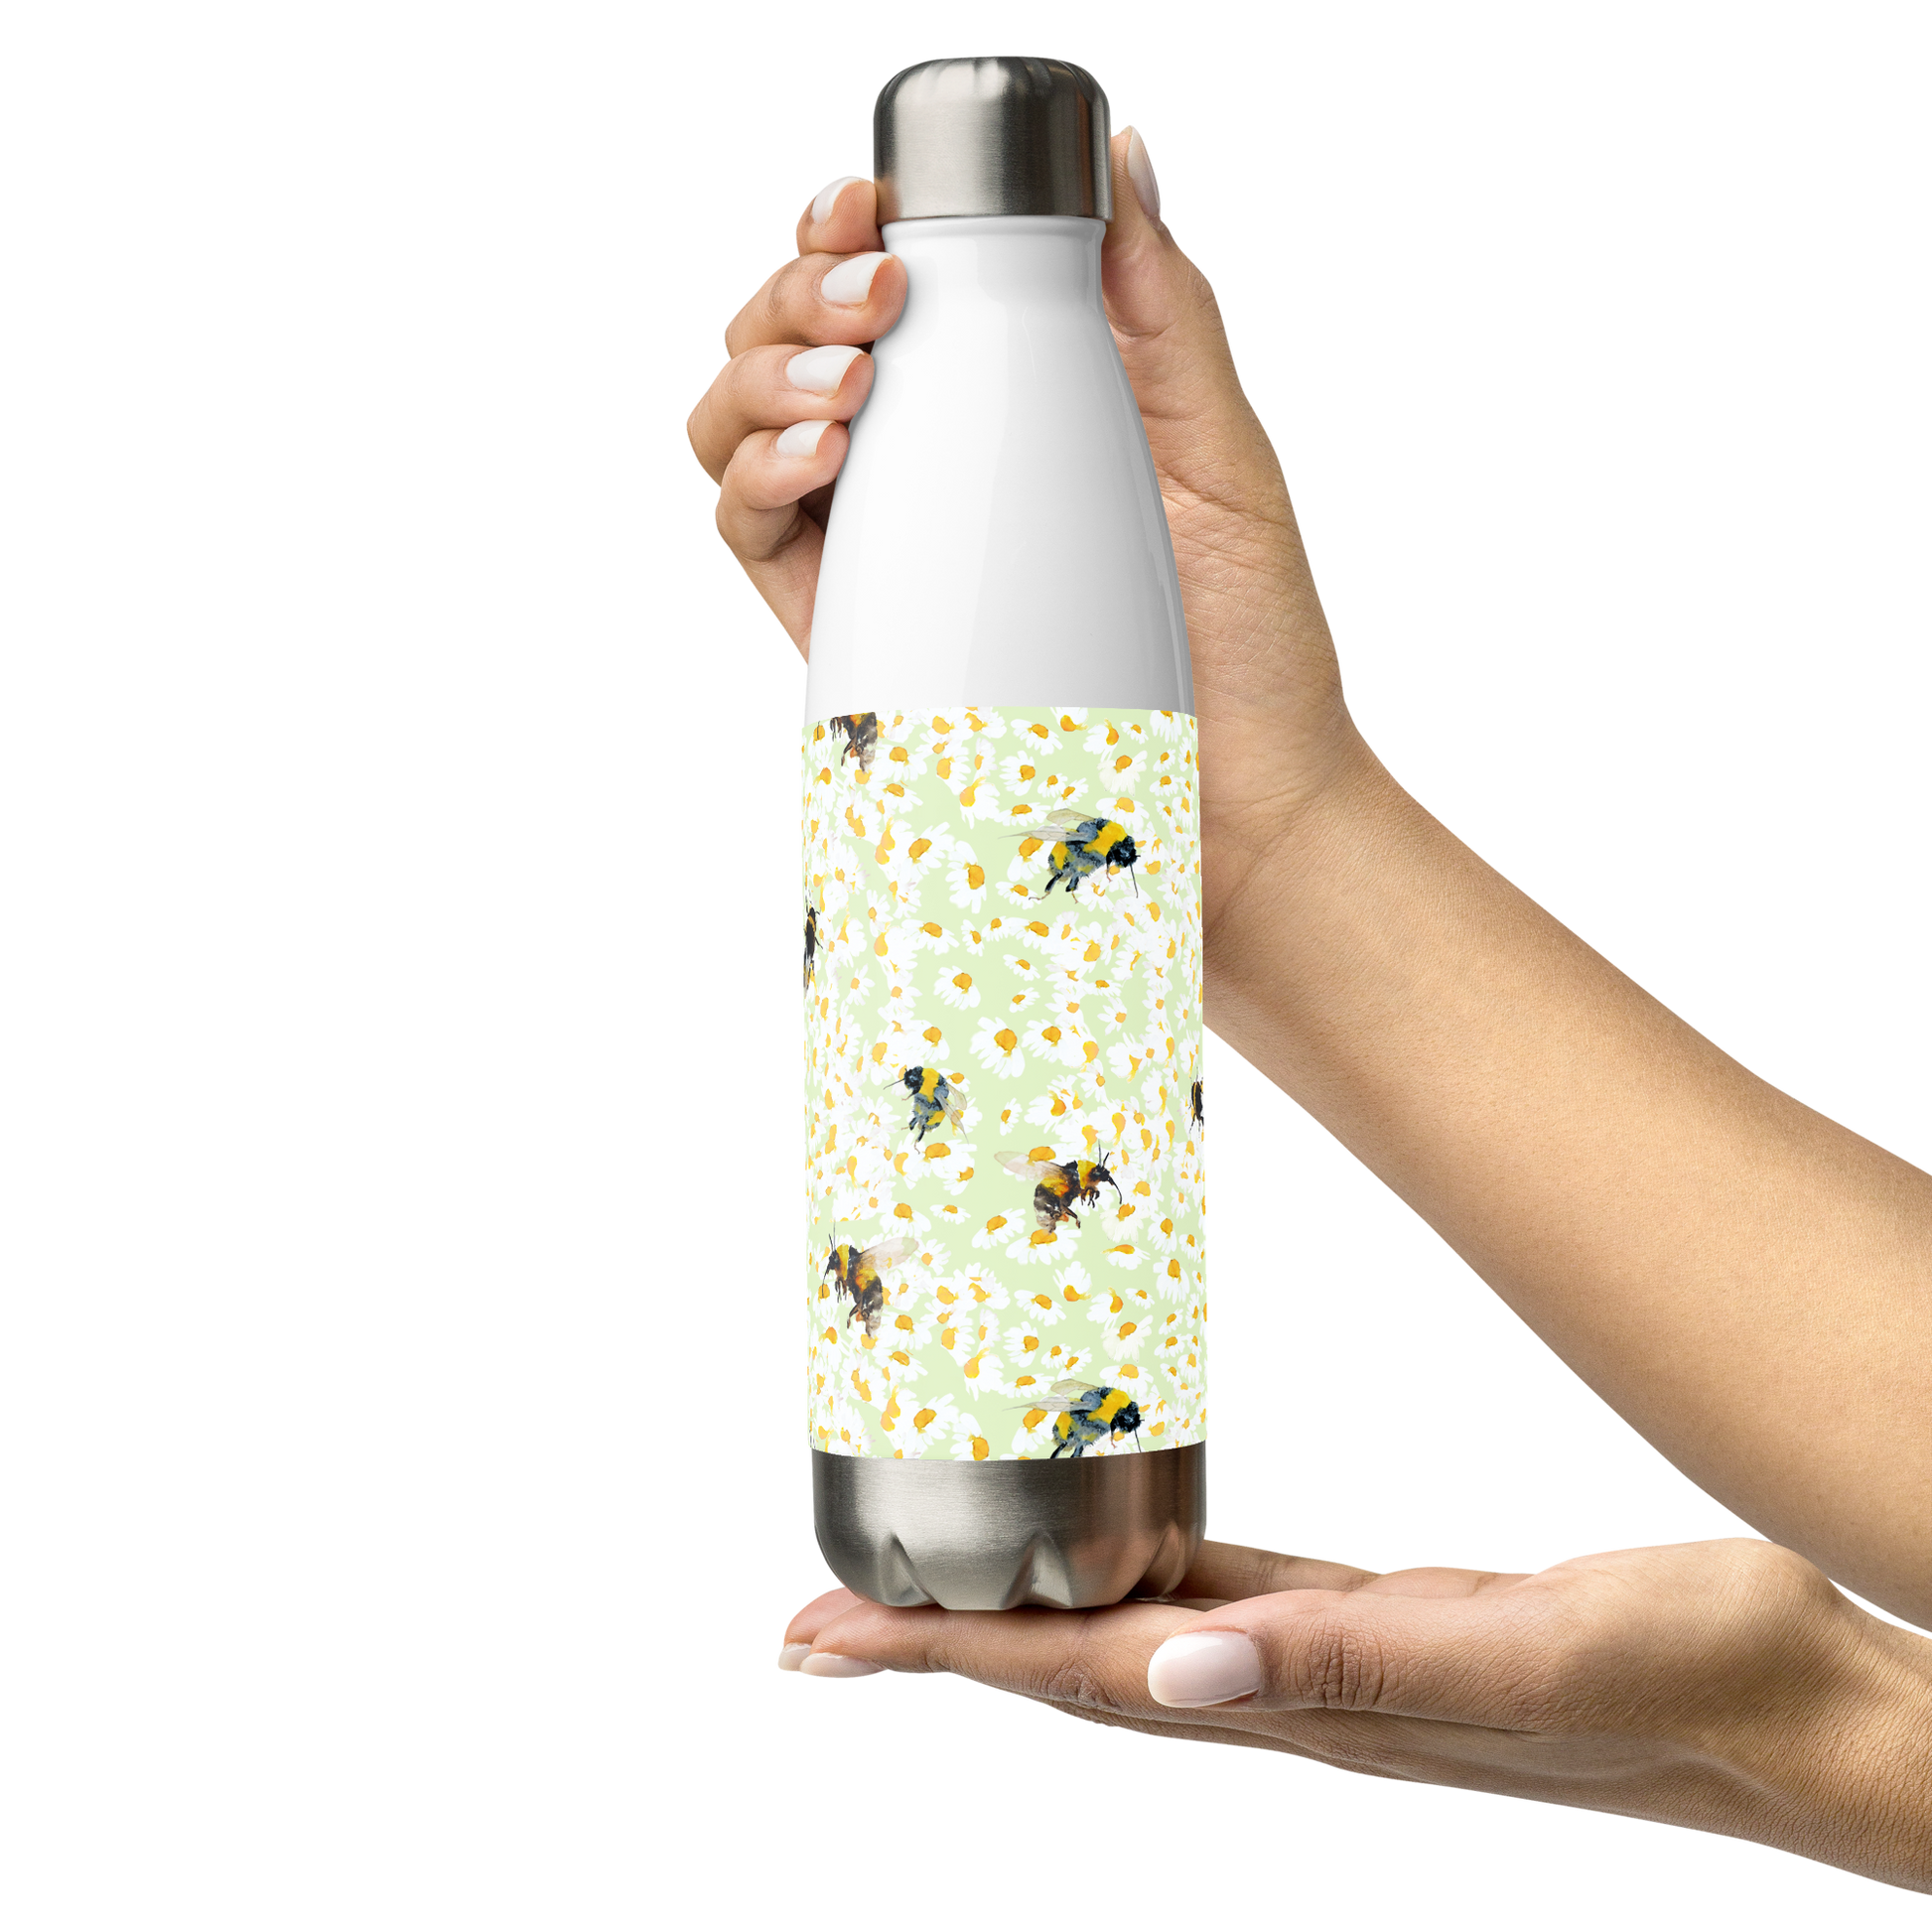 Design Bee and Daisies Bottle by Artist Annie Grant